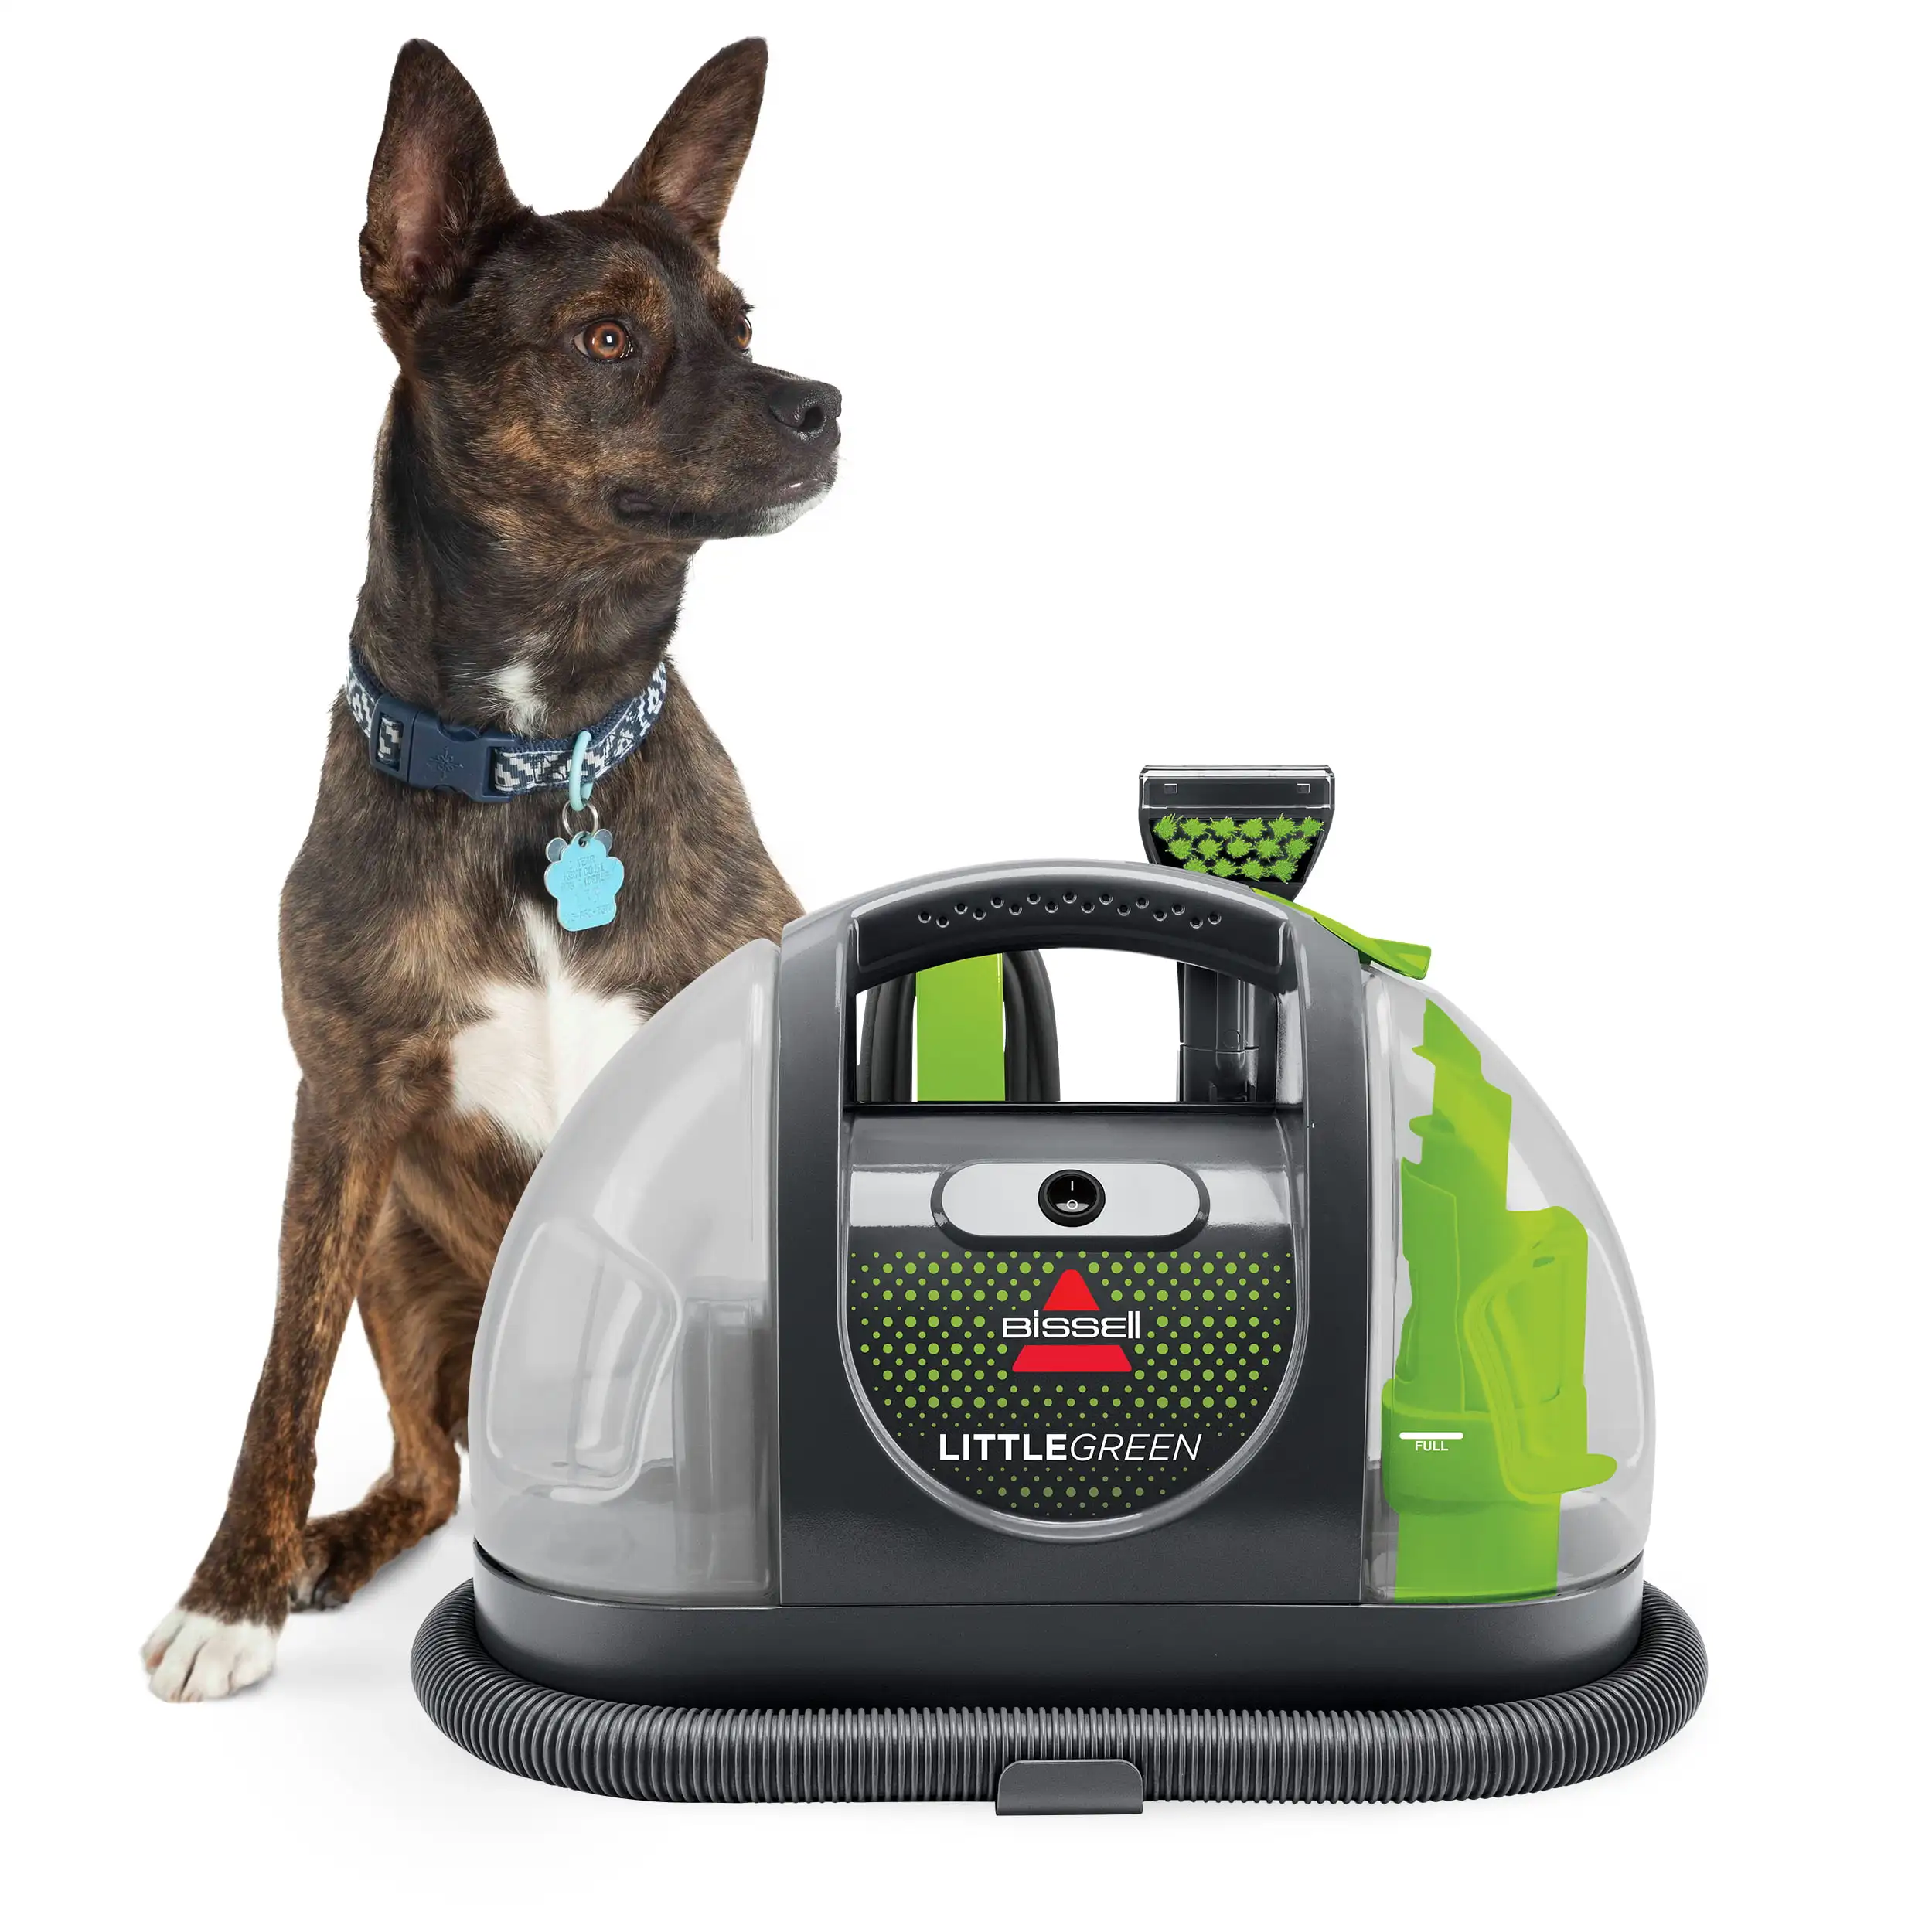 

Vacuum Cleaners for Home Pets Little Green Portable Carpet Cleaner 3369